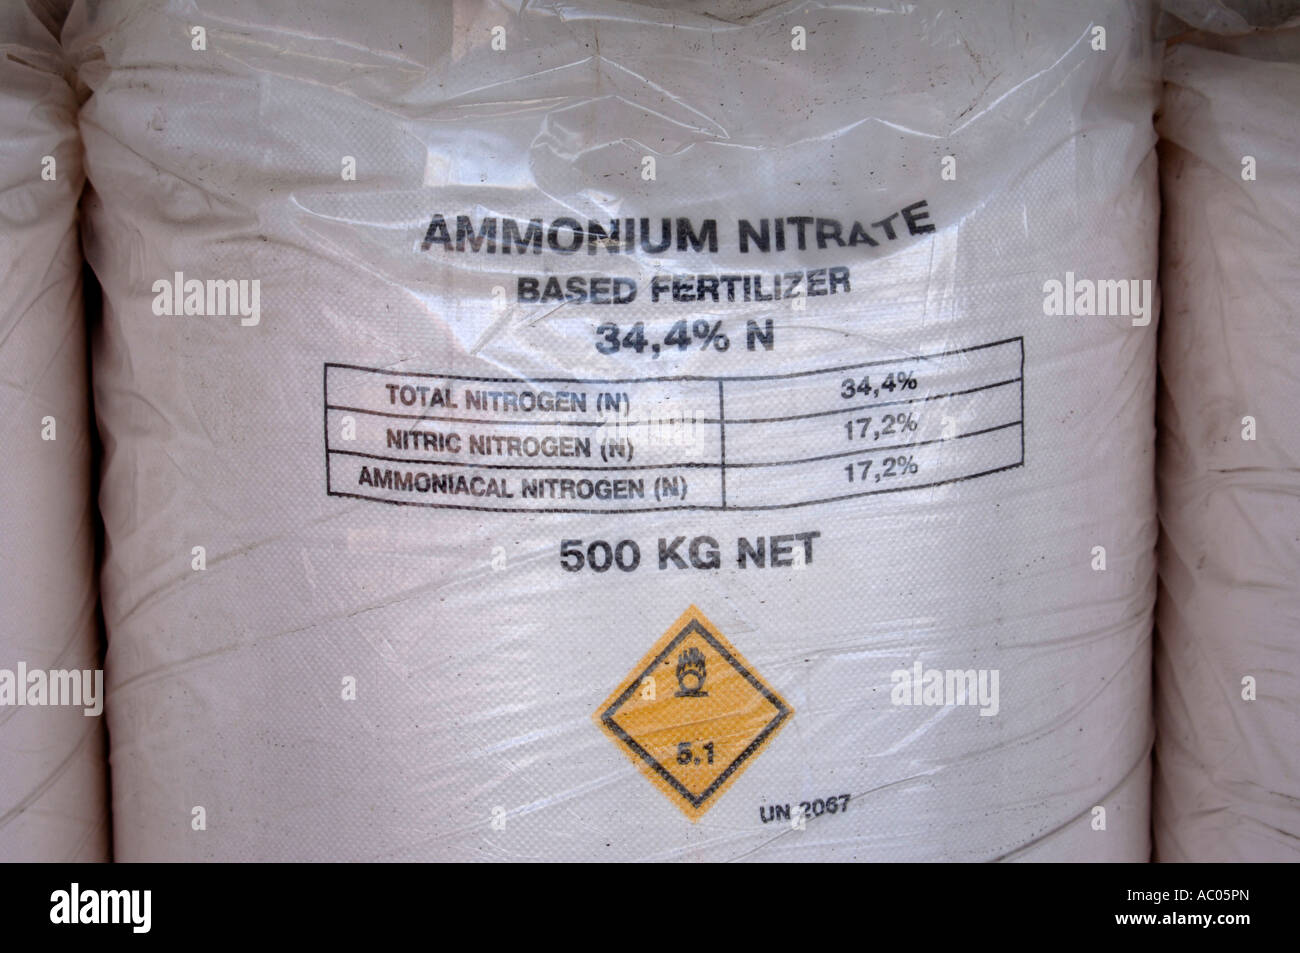 AN INDUSTRIAL SIZED BAG OF AMMONIUM NITRATE AGRICULTURAL FERTILIZER WHICH CAN BE USED IN IMPROVISED EXPLOSIVE DEVICES UK Stock Photo